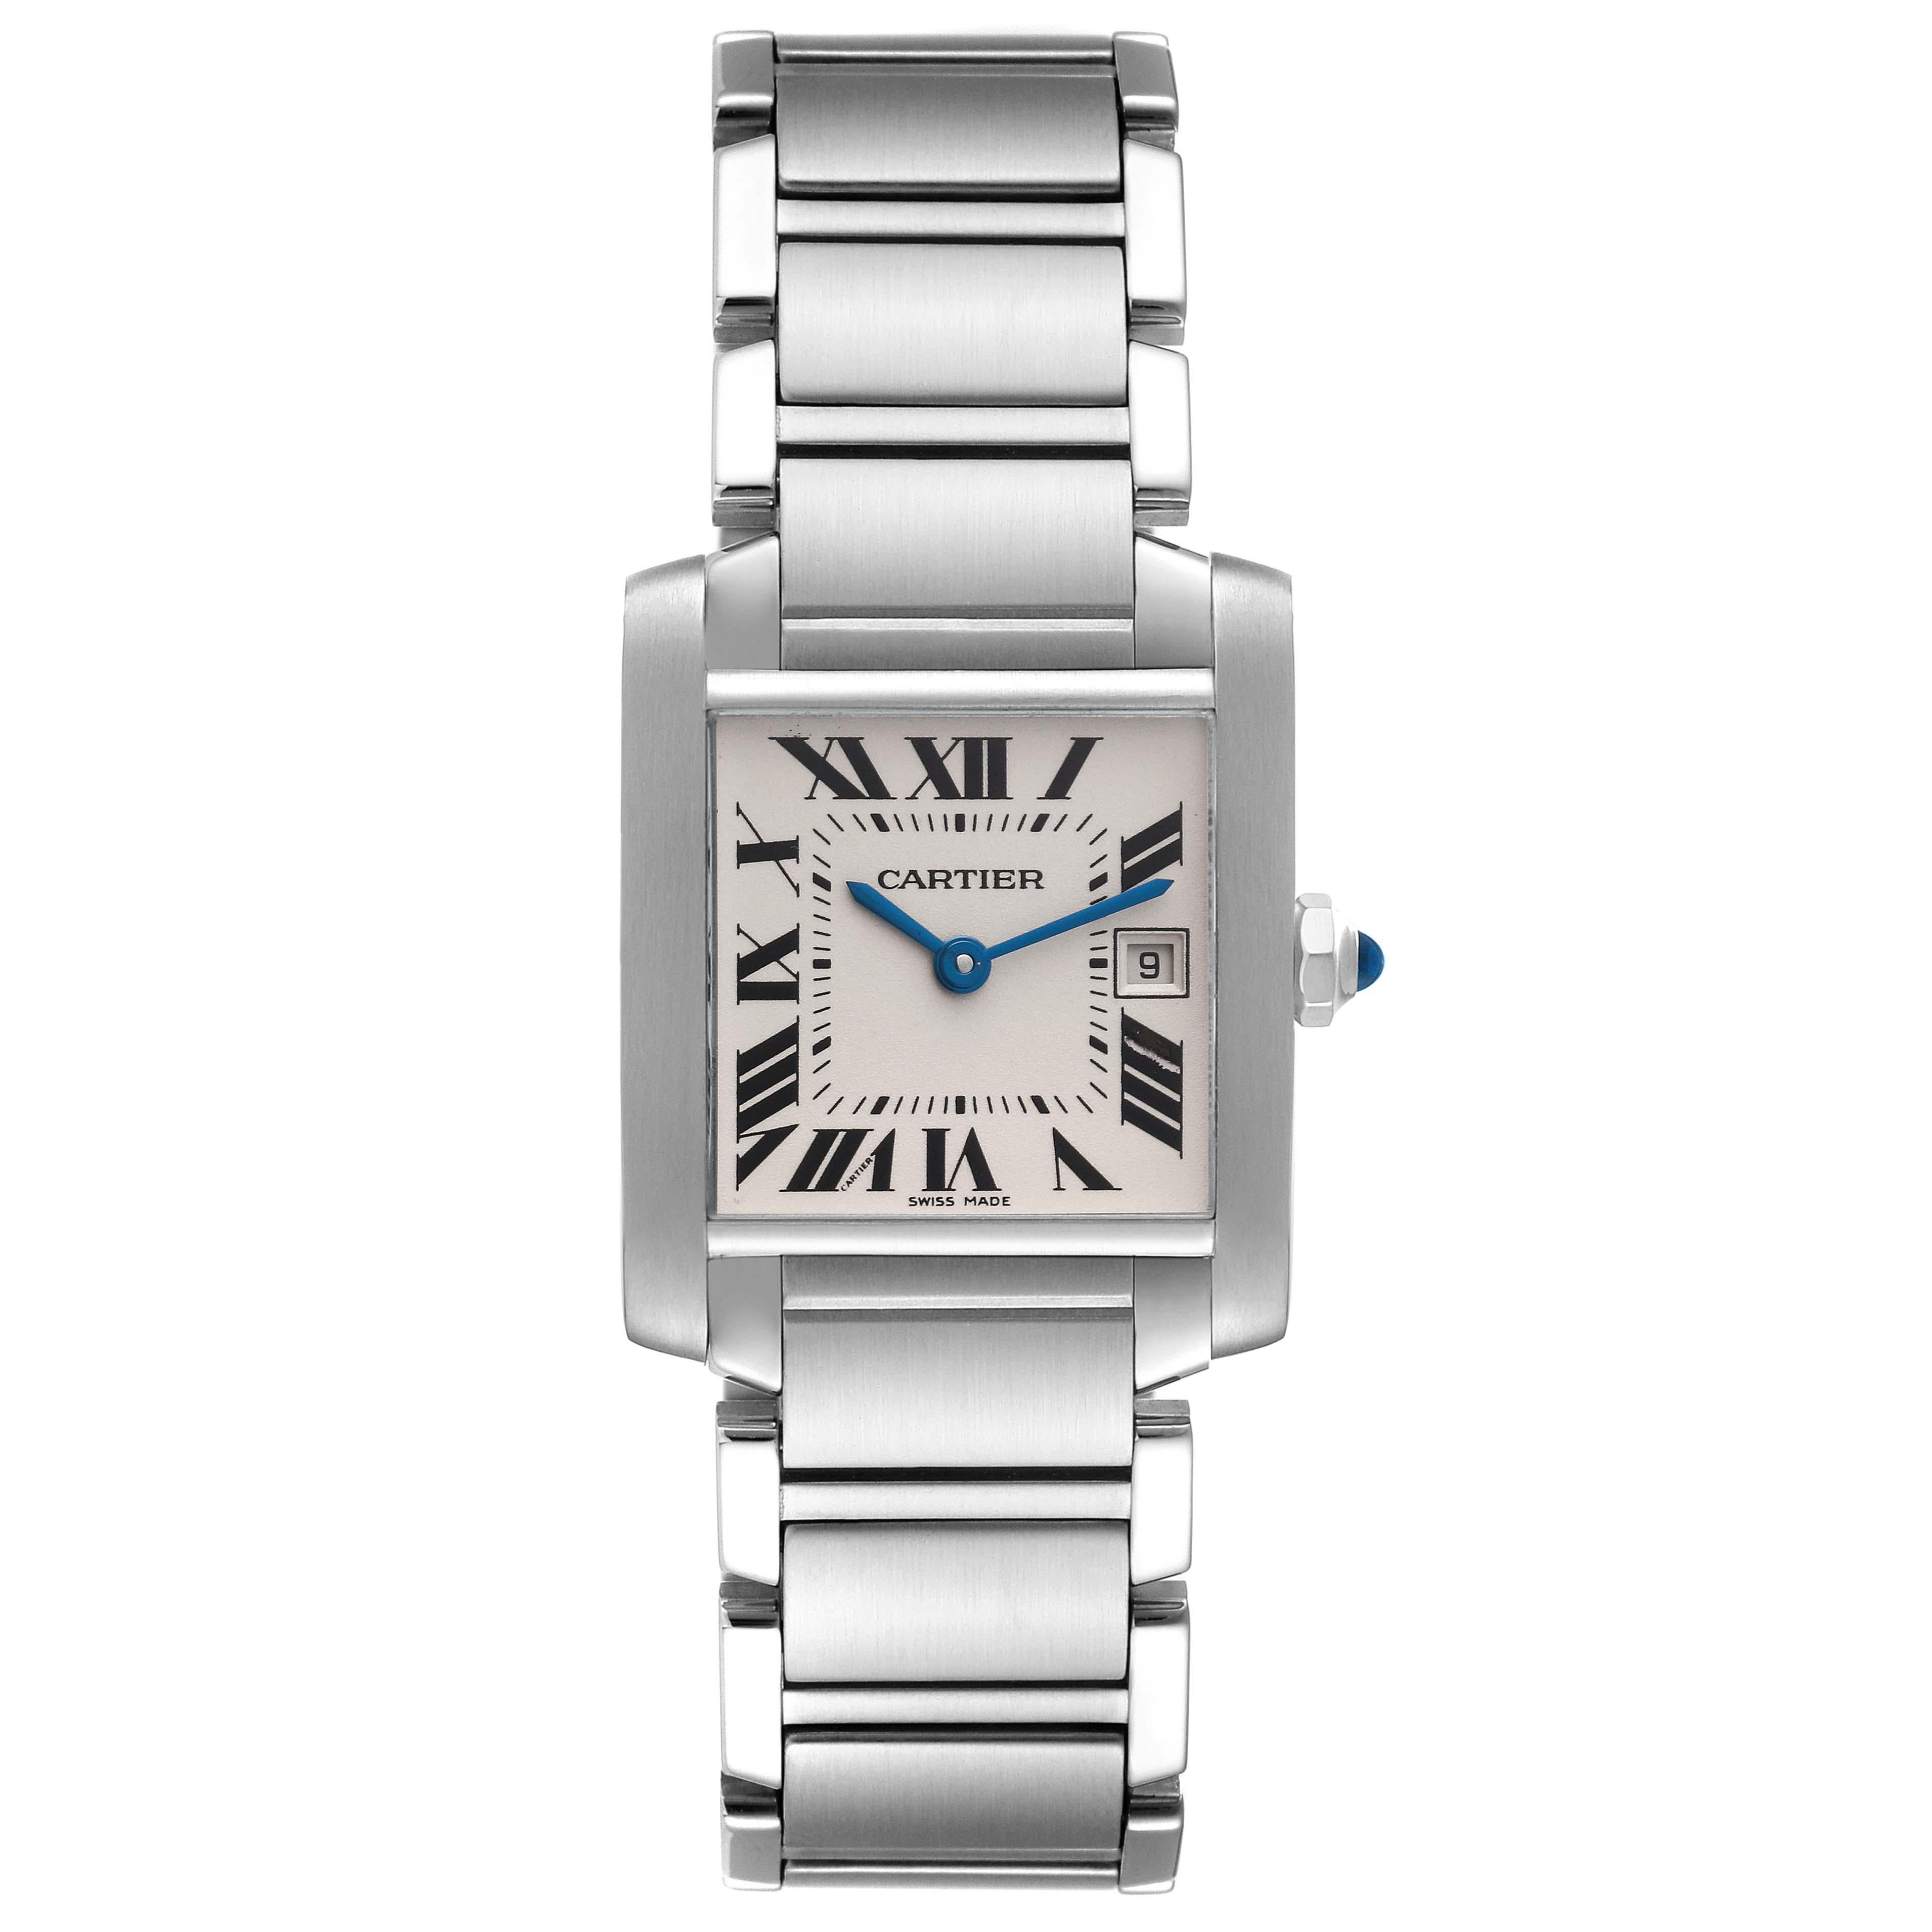 Cartier Tank Francaise Midsize Silver Dial Steel Ladies Watch W51003Q3. Quartz movement. Rectangular stainless steel 25.0 X 30.0 mm case. Octagonal crown set with a blue spinel cabochon. . Scratch resistant sapphire crystal. Silver grained dial with